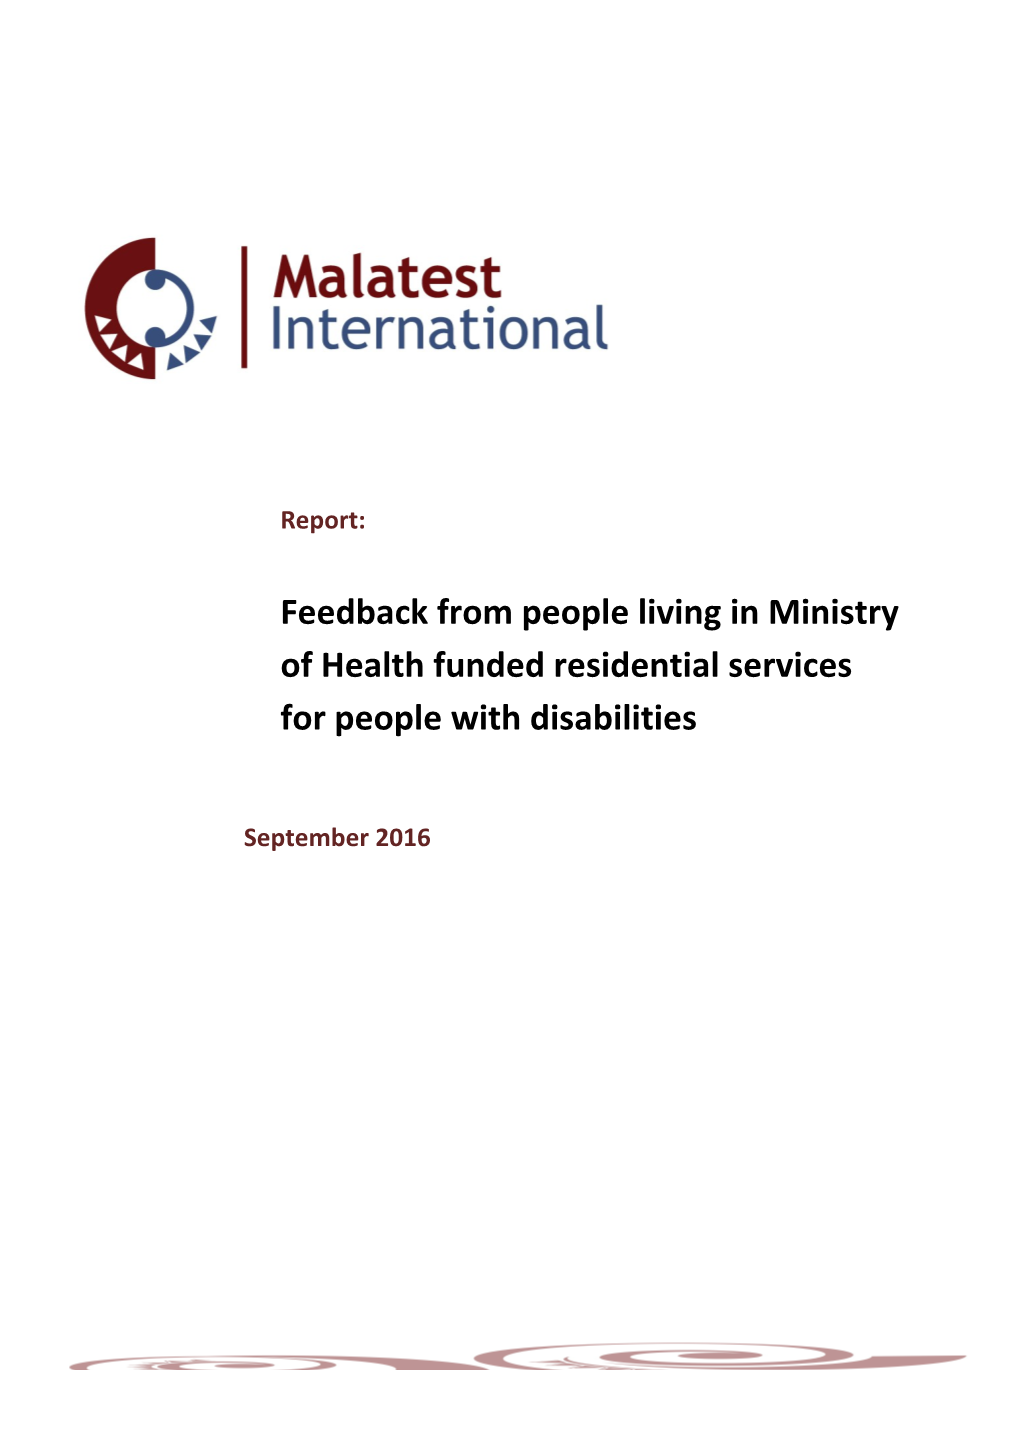 Feedback from People Living in Ministry of Health Funded Residential Services for People